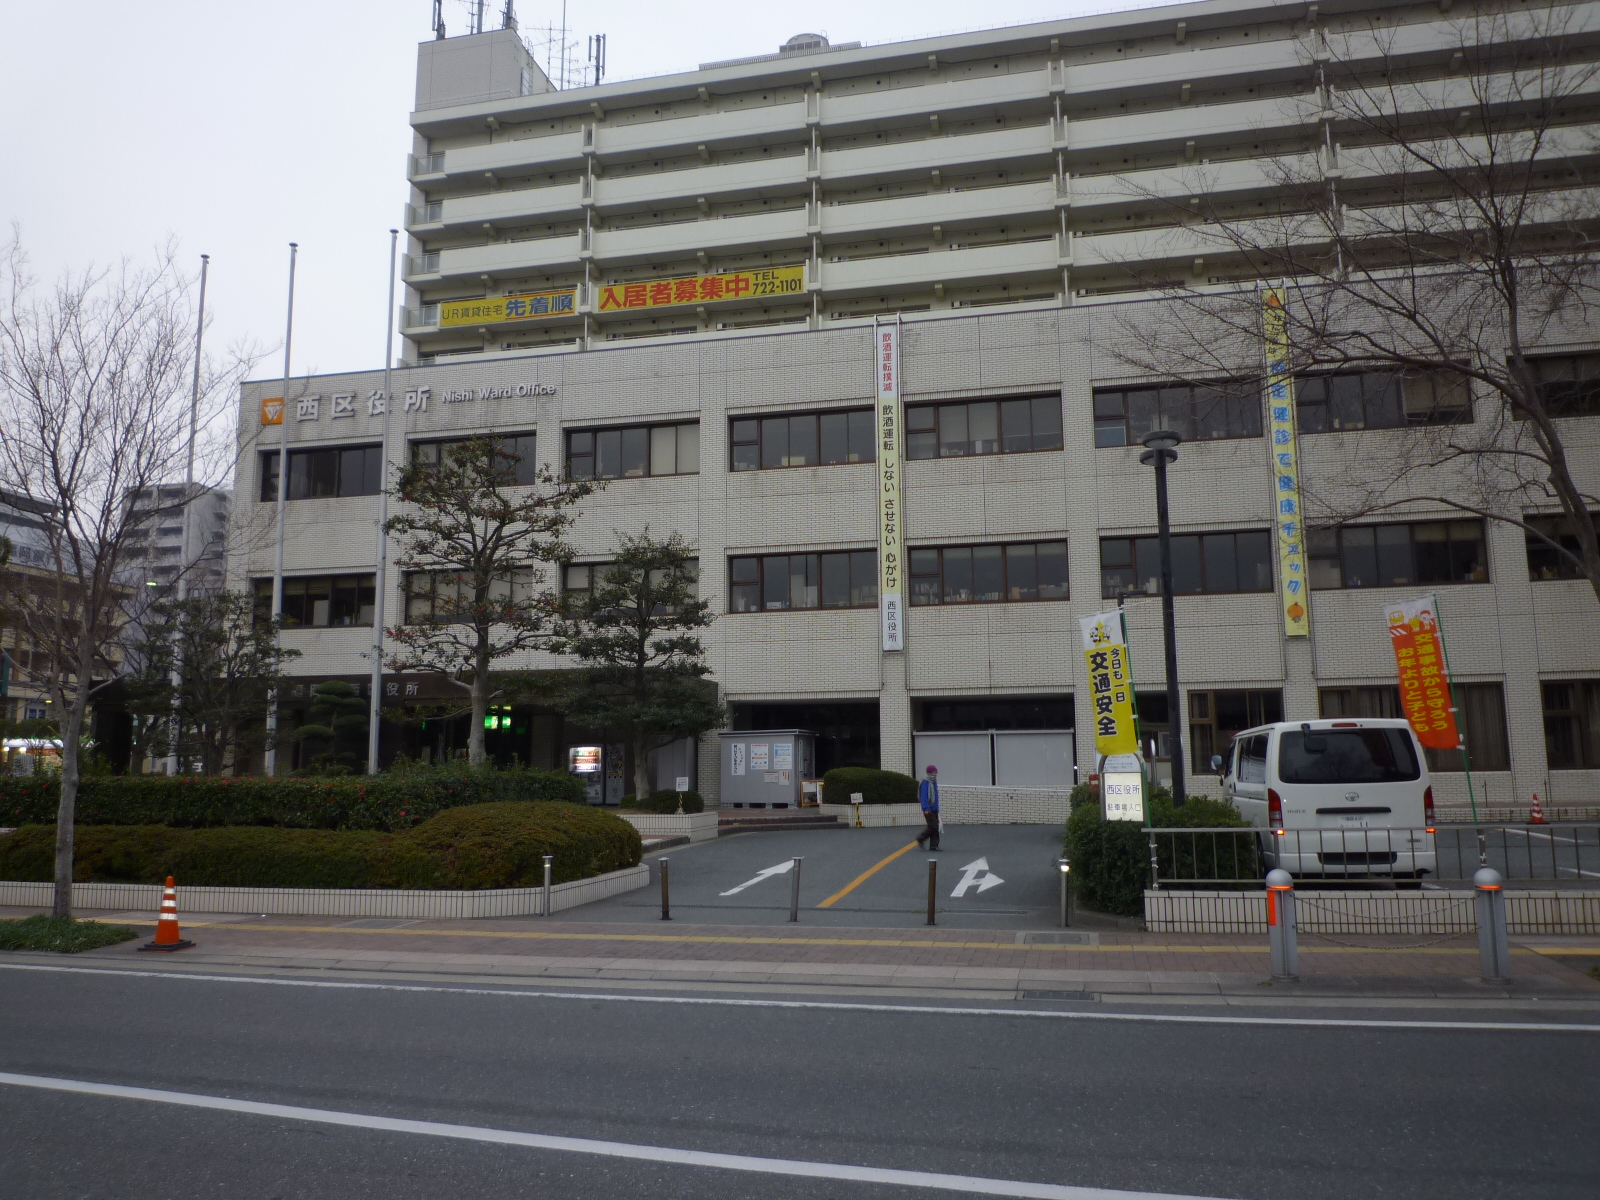 Government office. 796m to Fukuoka West Ward (government office)